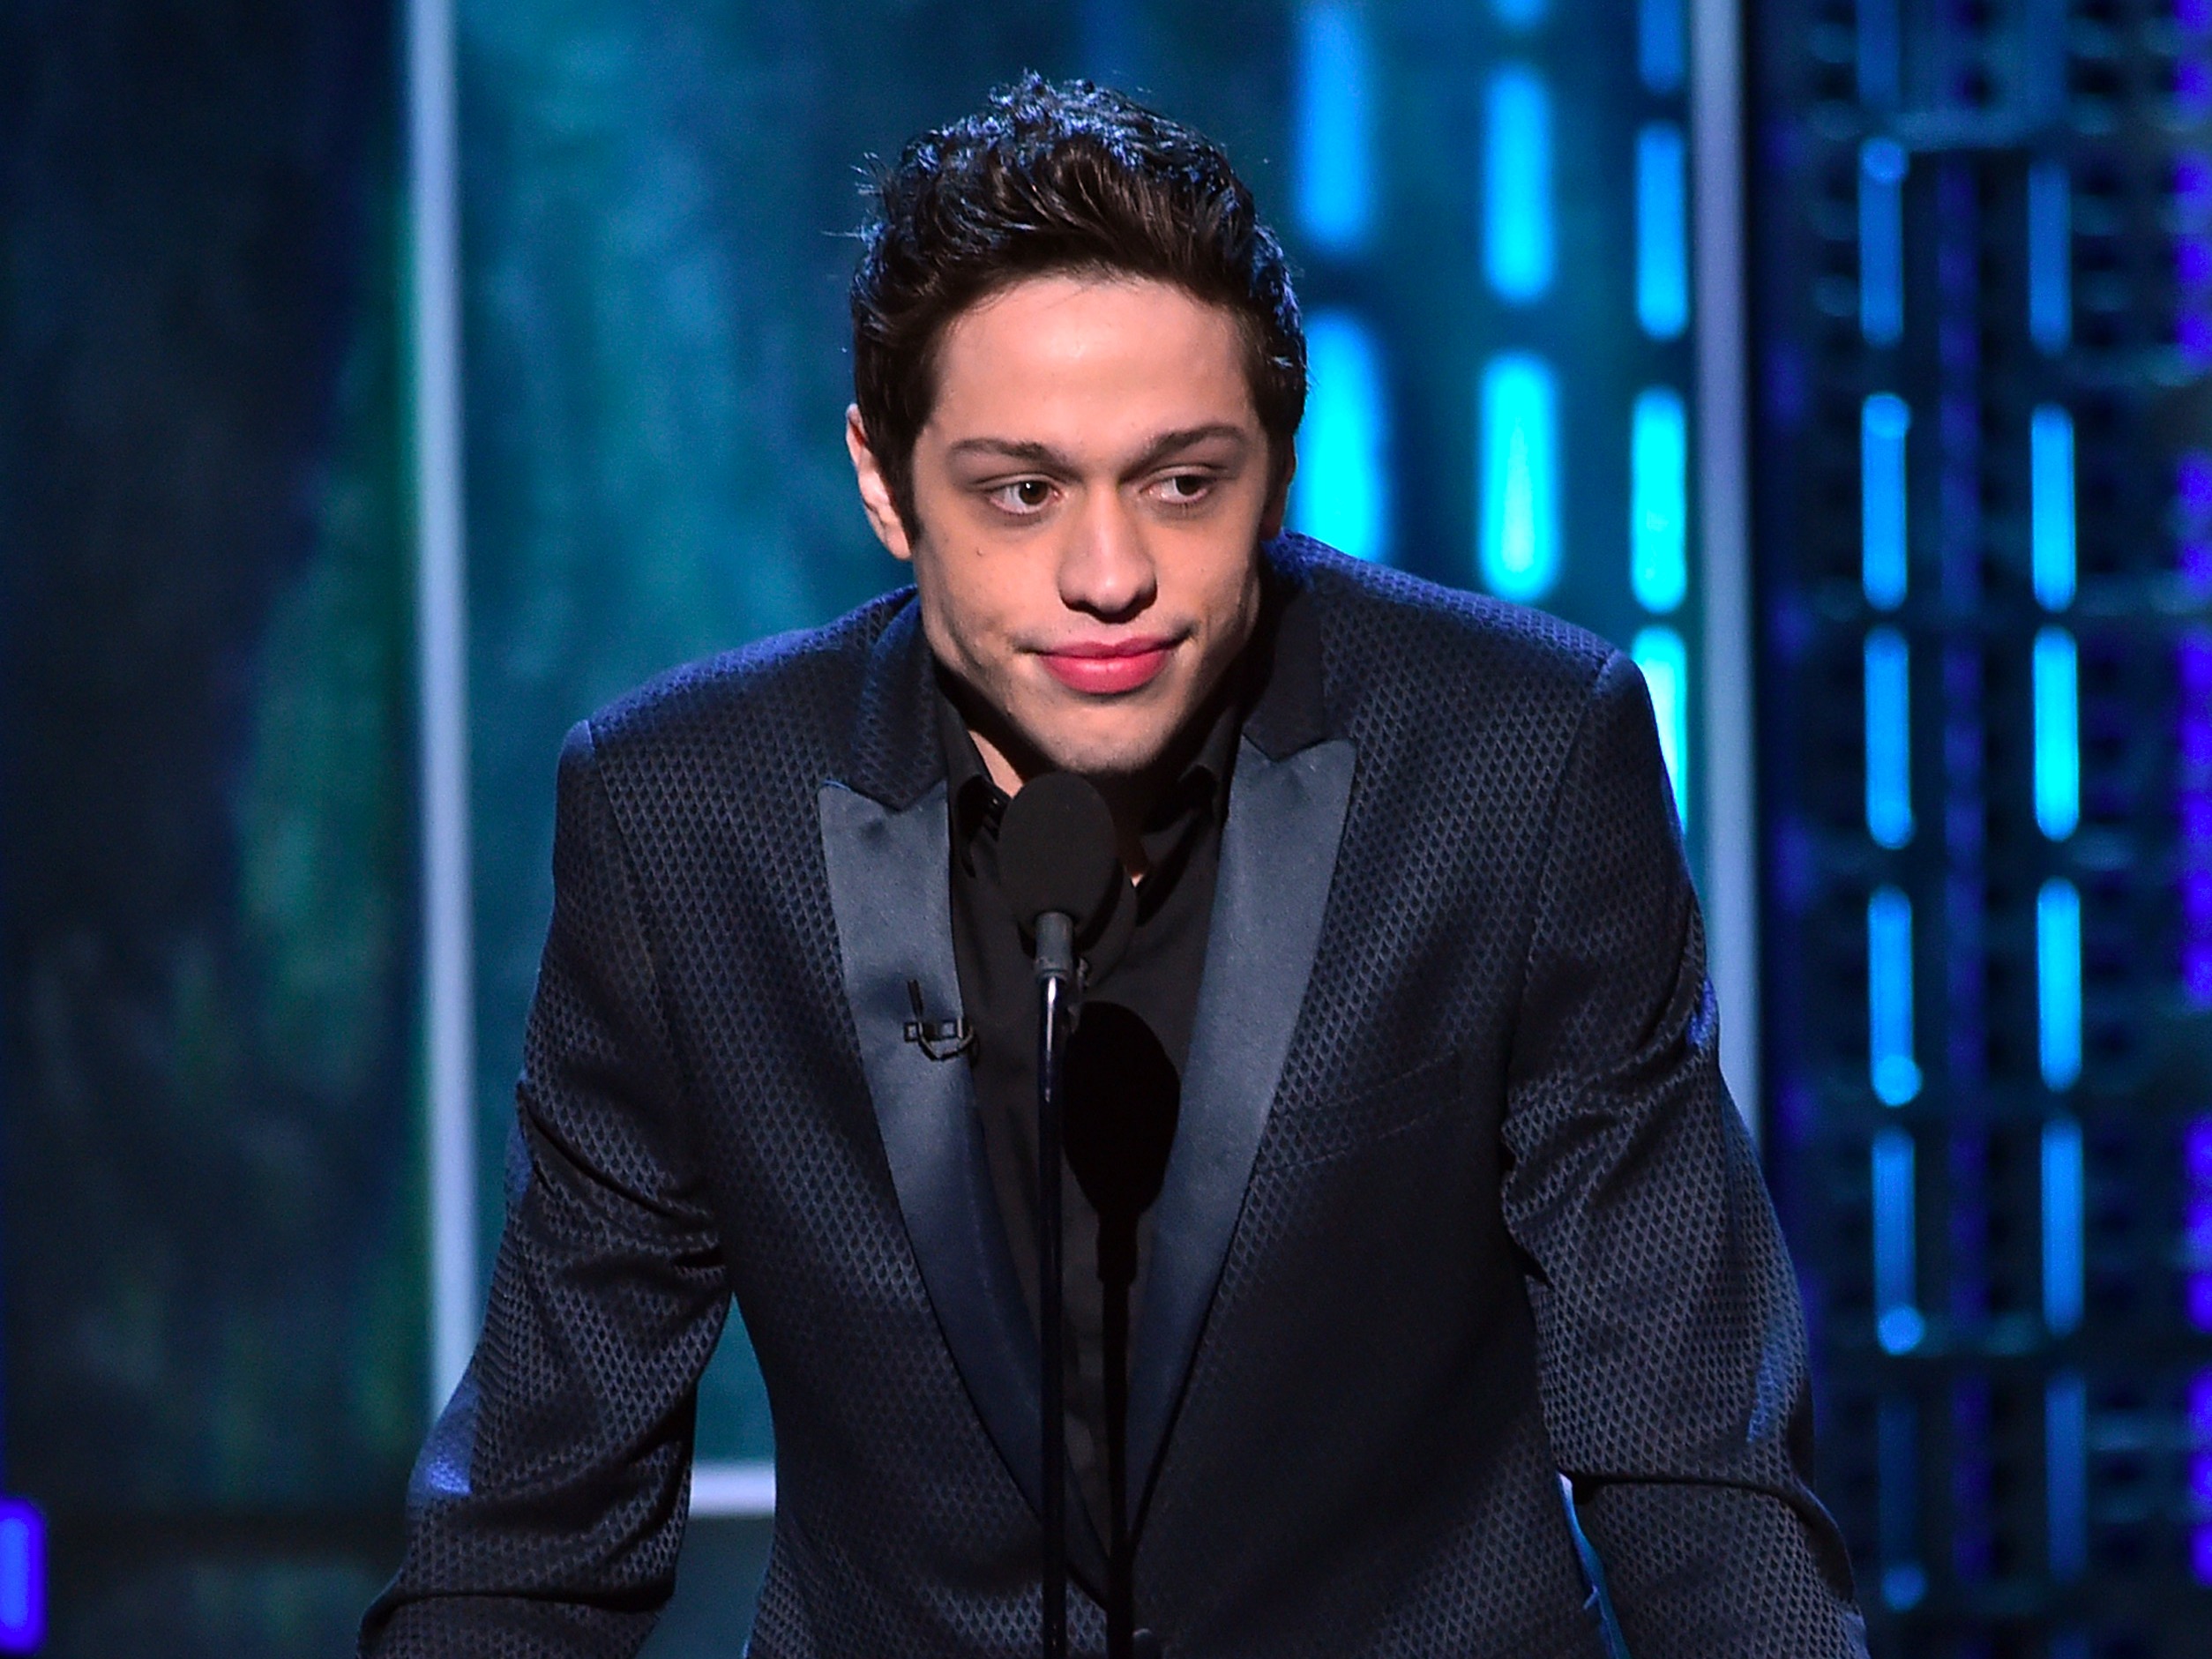 Pete Davidson Ethnicity, Race, and Nationality